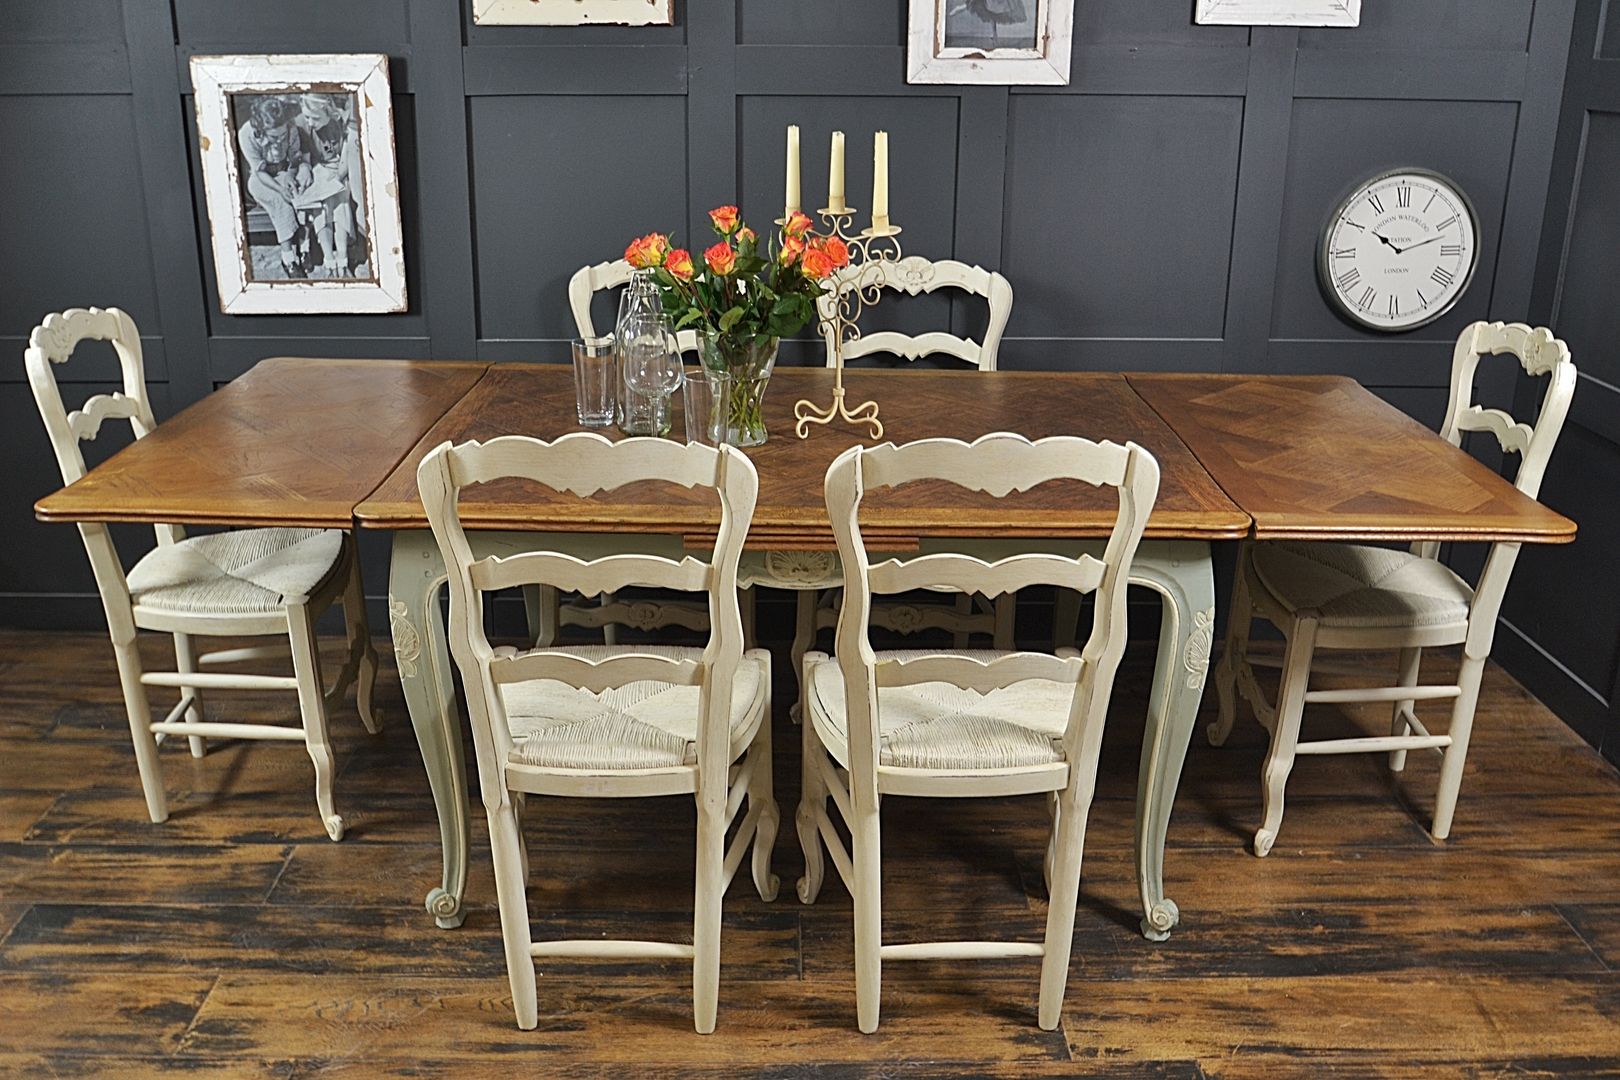 Shabby Chic French Oak Dining Table with 6 Chairs in Rococo, The Treasure Trove Shabby Chic & Vintage Furniture The Treasure Trove Shabby Chic & Vintage Furniture Їдальня Таблиці